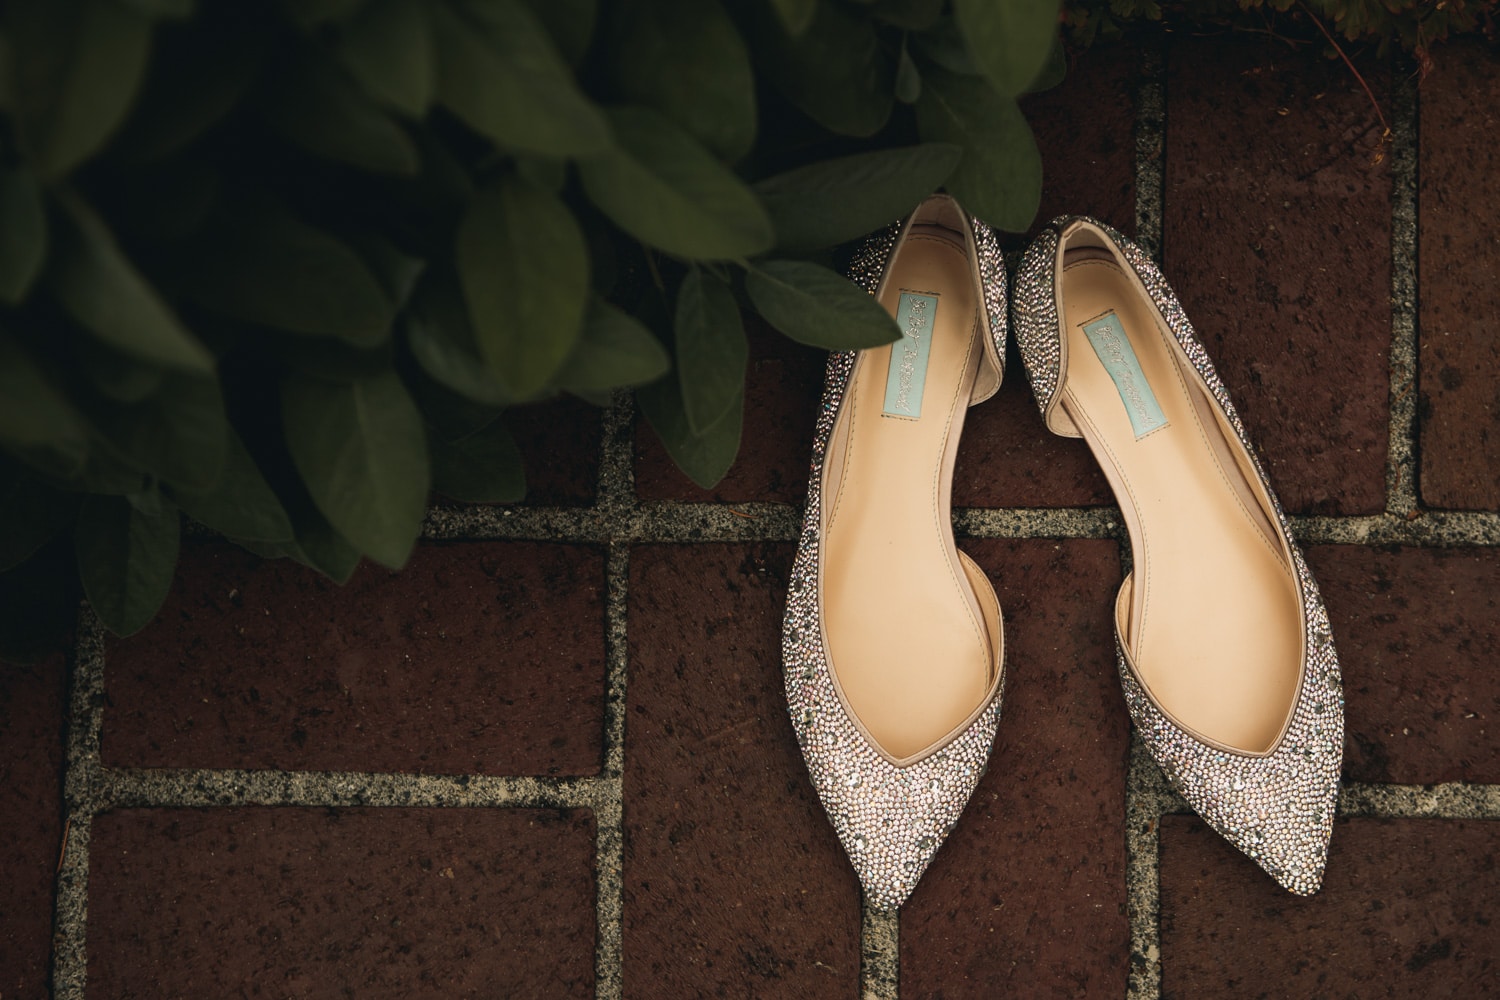 bellingham wedding venue with Eb and Greg at Lairmont manor for an elegant wedding in pnw and Seattle wedding shoes